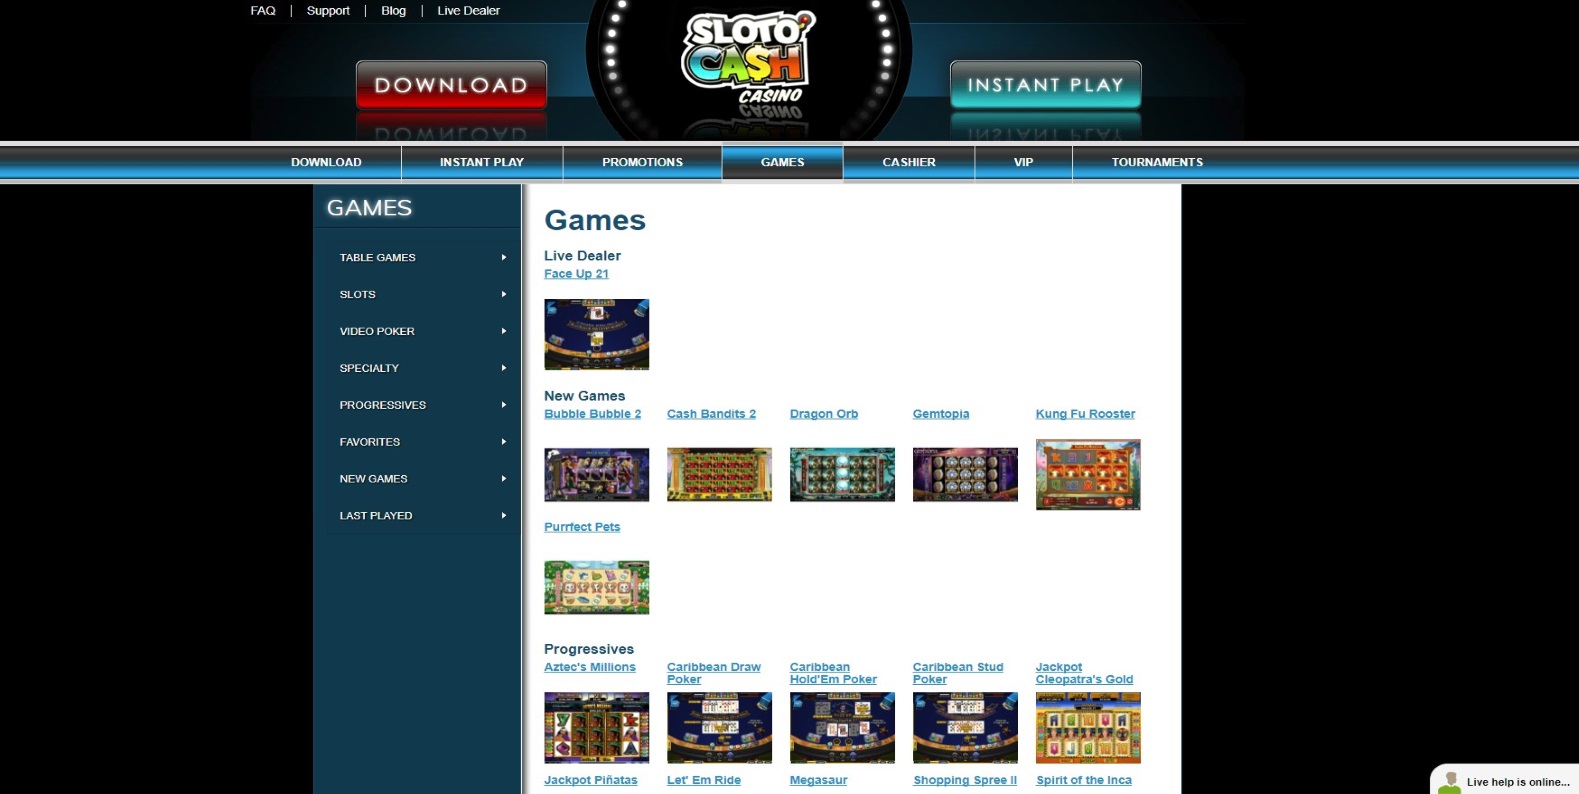 The games page of Sloto'Cash casino